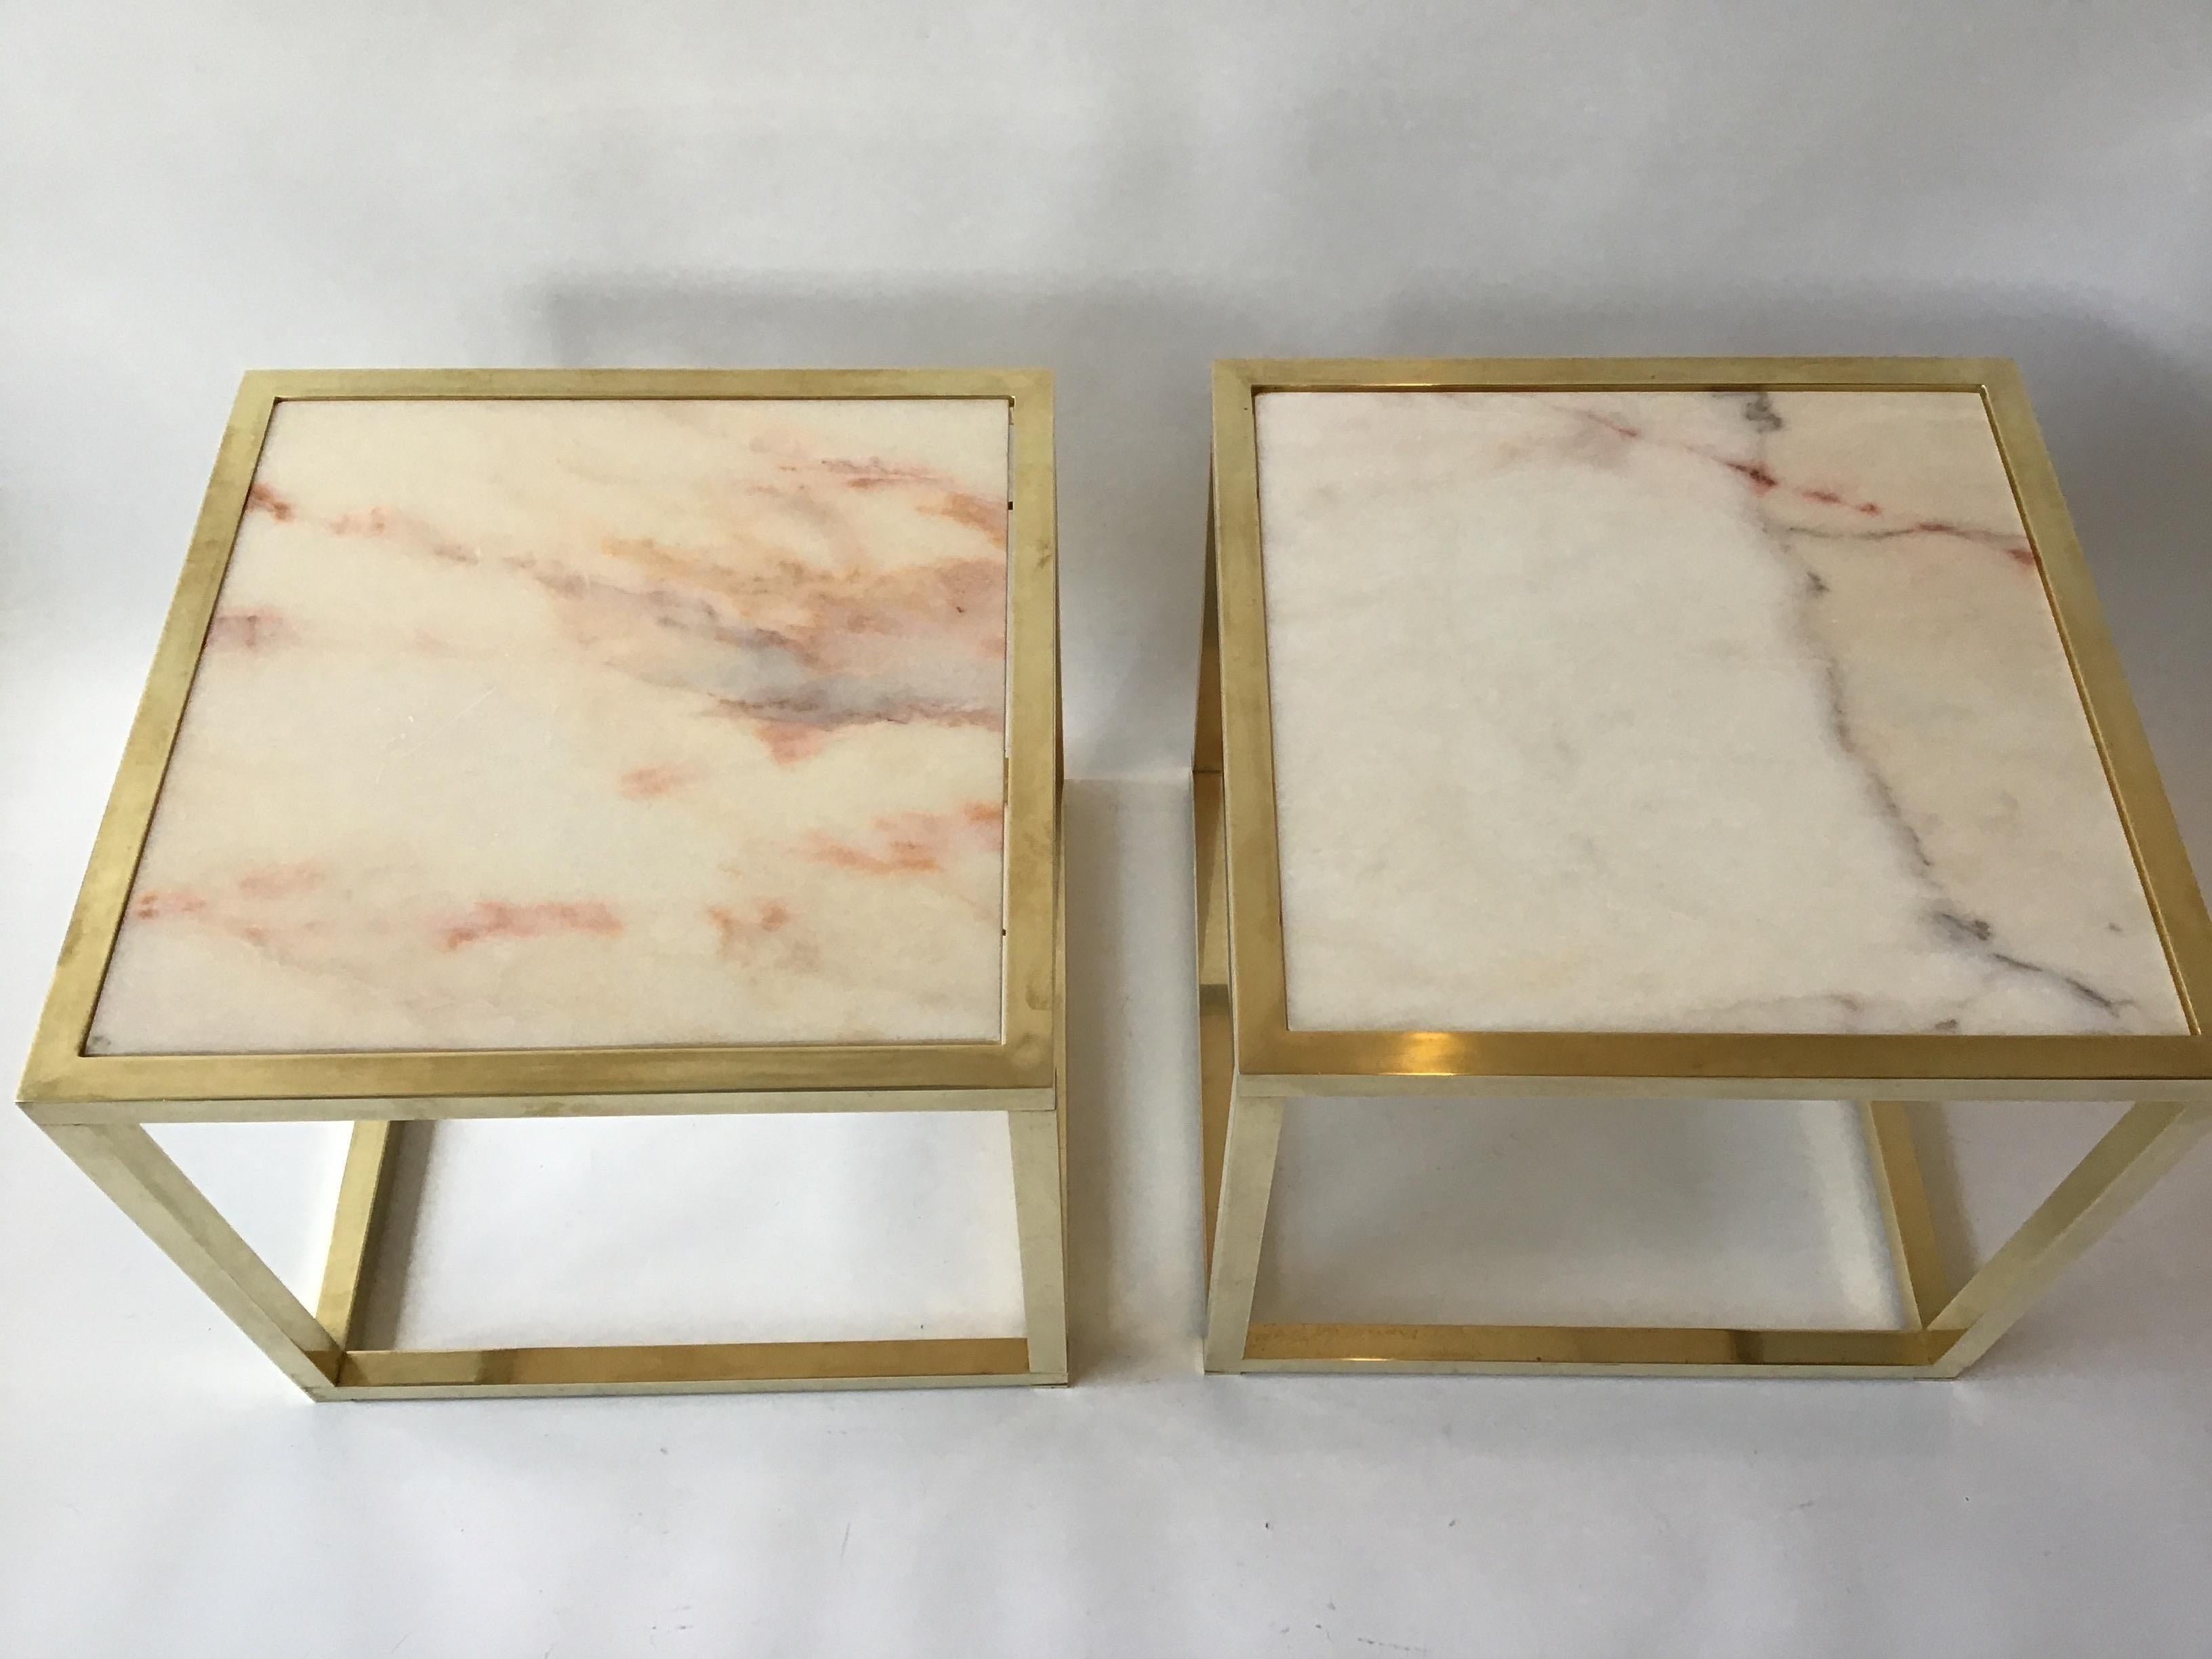 Pair of 1970s solid brass cube tables, with marble tops. Tables have just been polished. Out of a Greenwich, Connecticut estate.